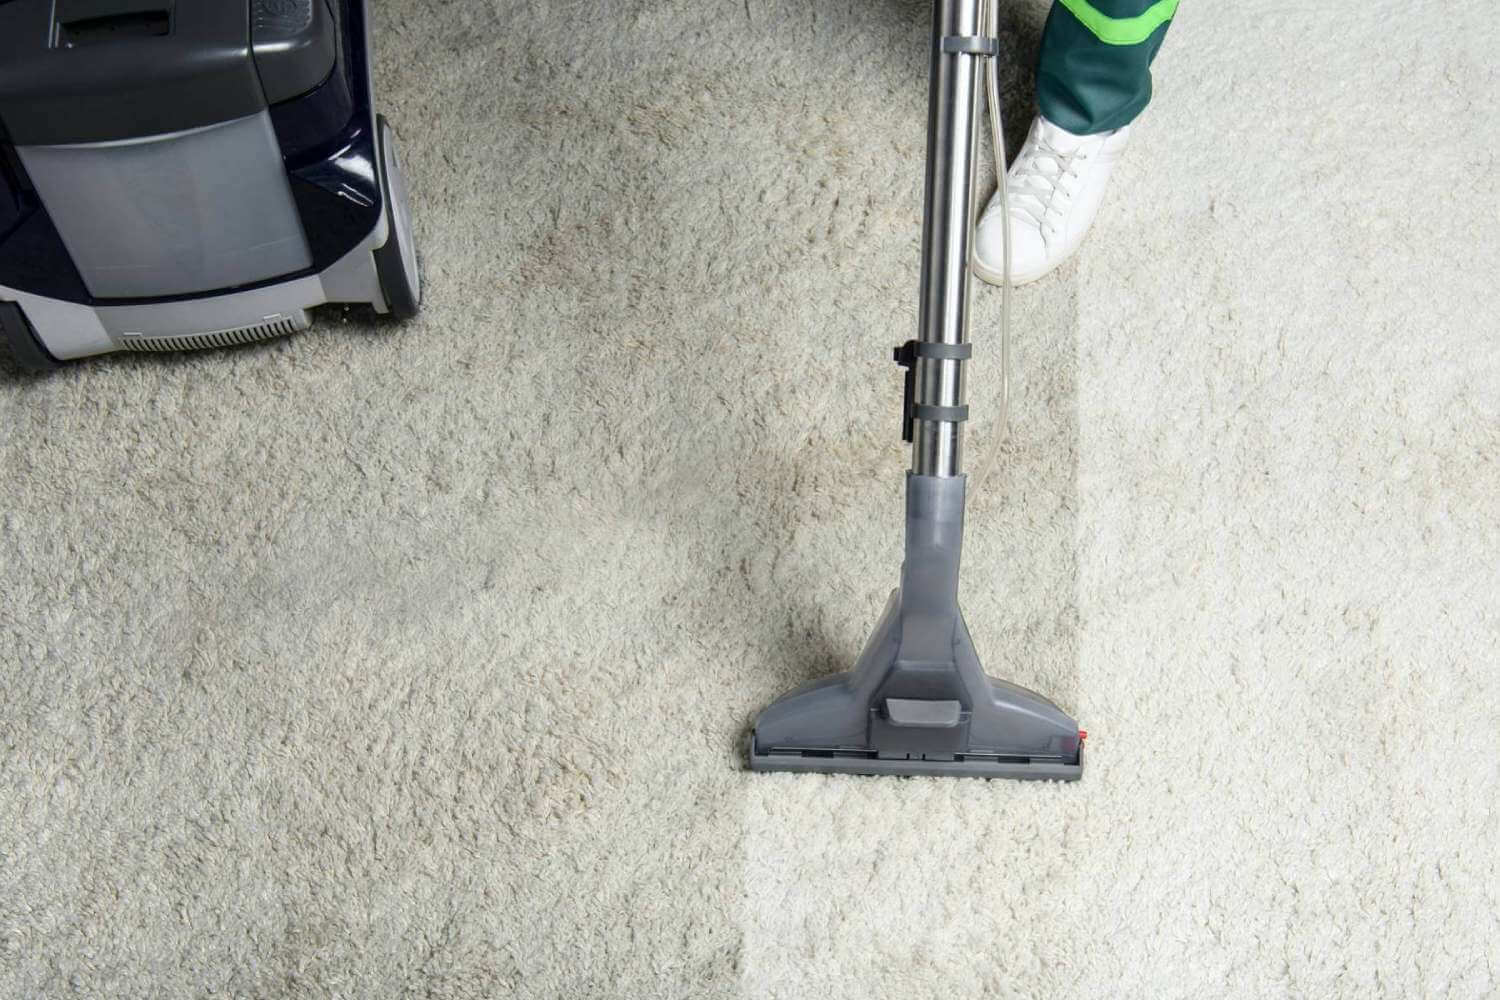 Mighty Clean professional cleaning carpet in white shoes